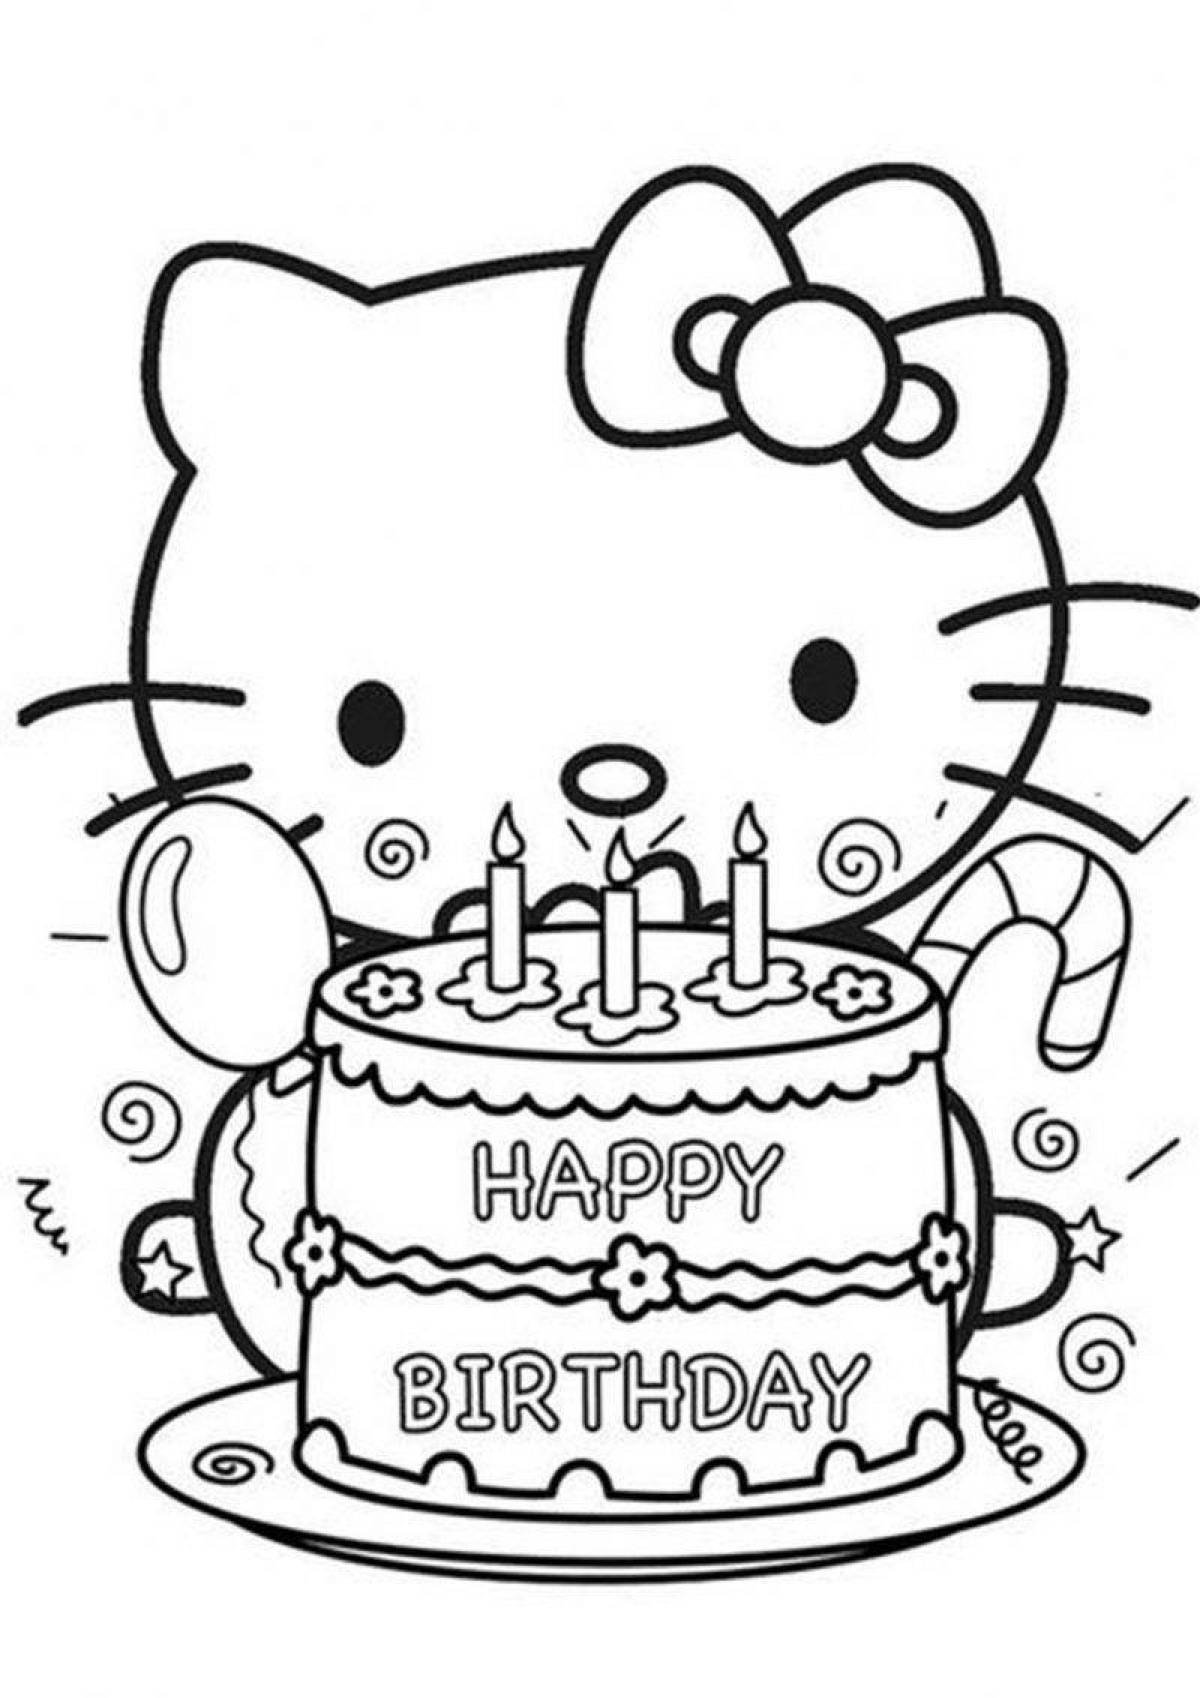 Happy birthday shining coloring page